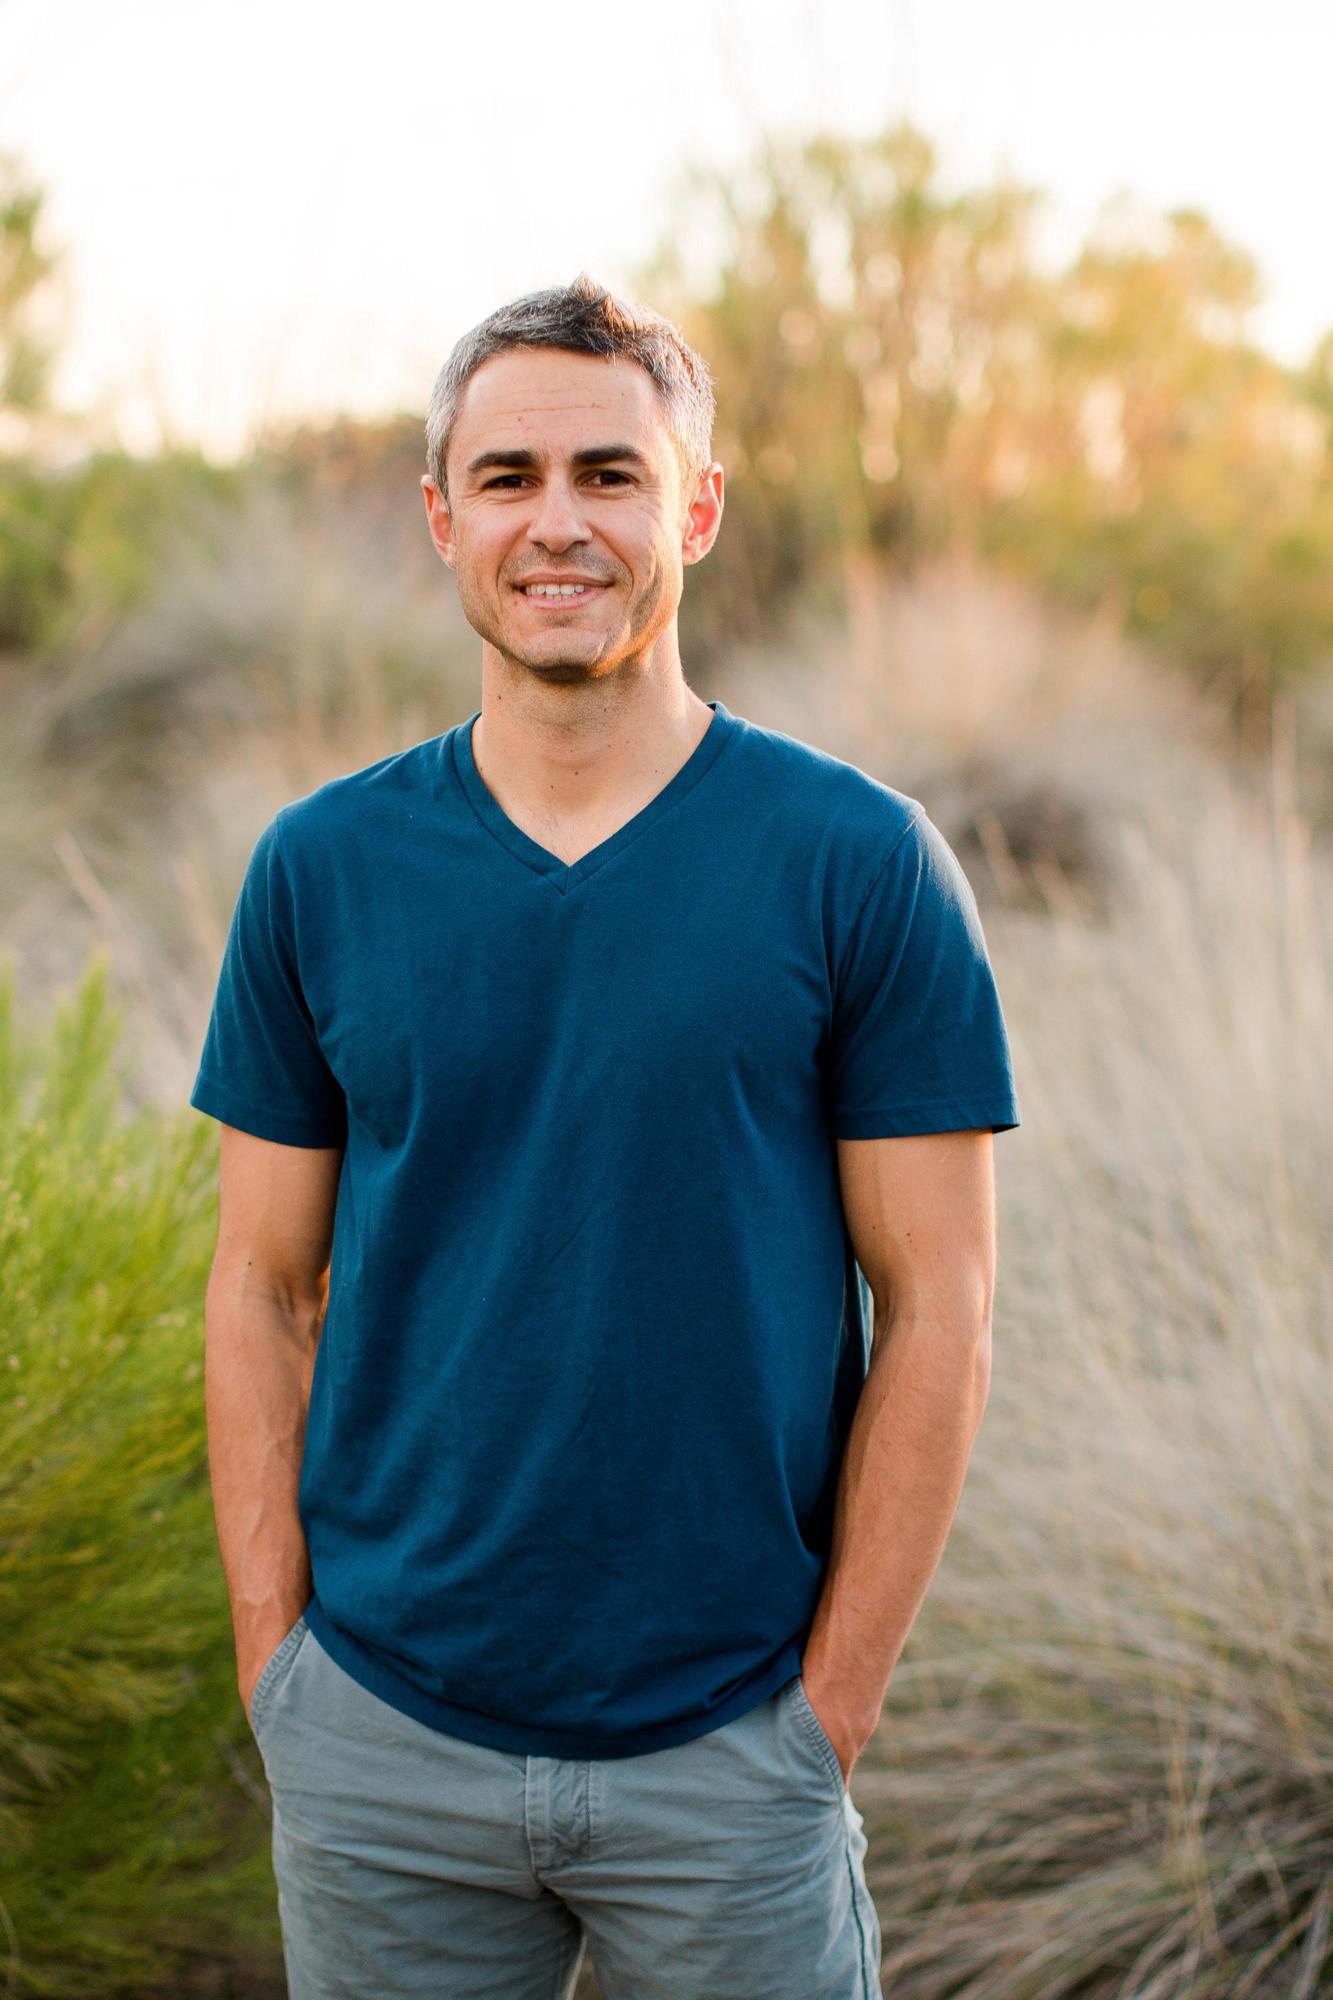 Man in blue t-shirt, sage green pants, short hair ,standing in a grassy field.